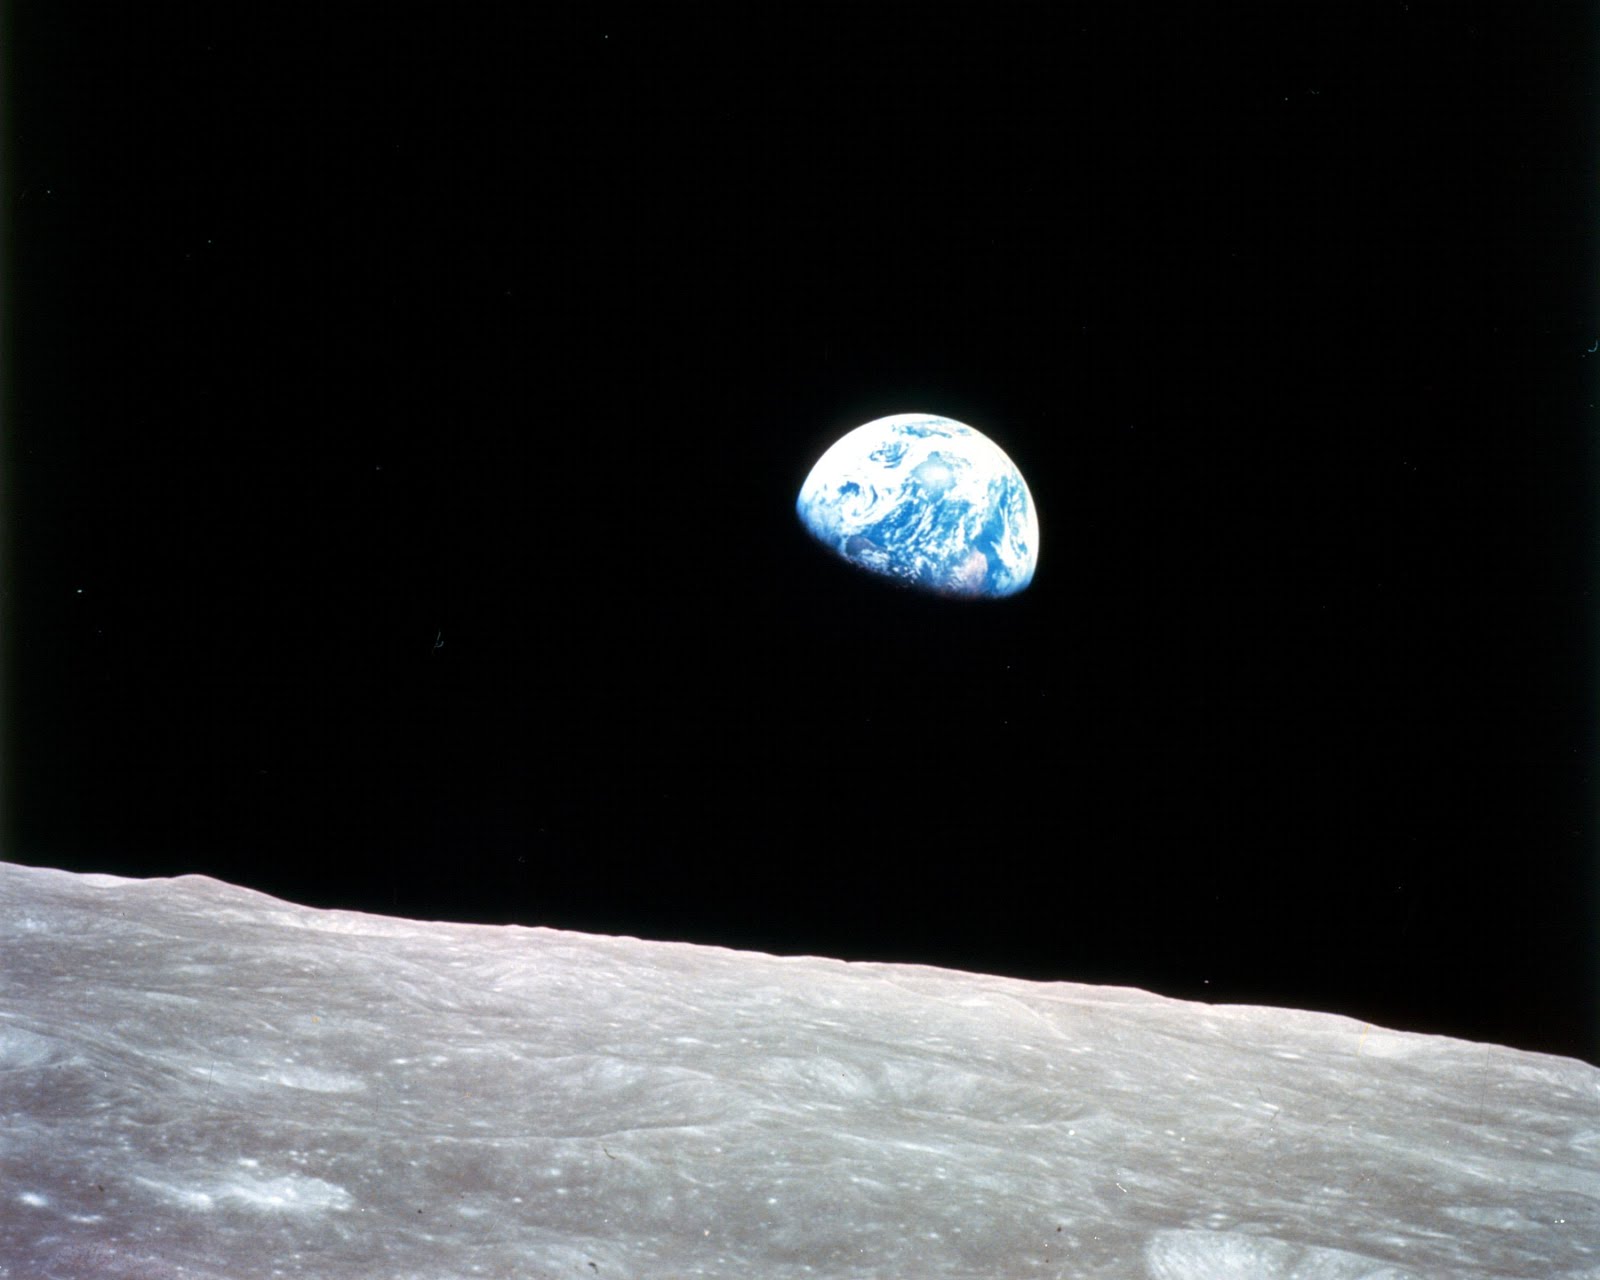 'earthrise' - nasa photograph; an icon of the nascent environmental movement of the early 1970s